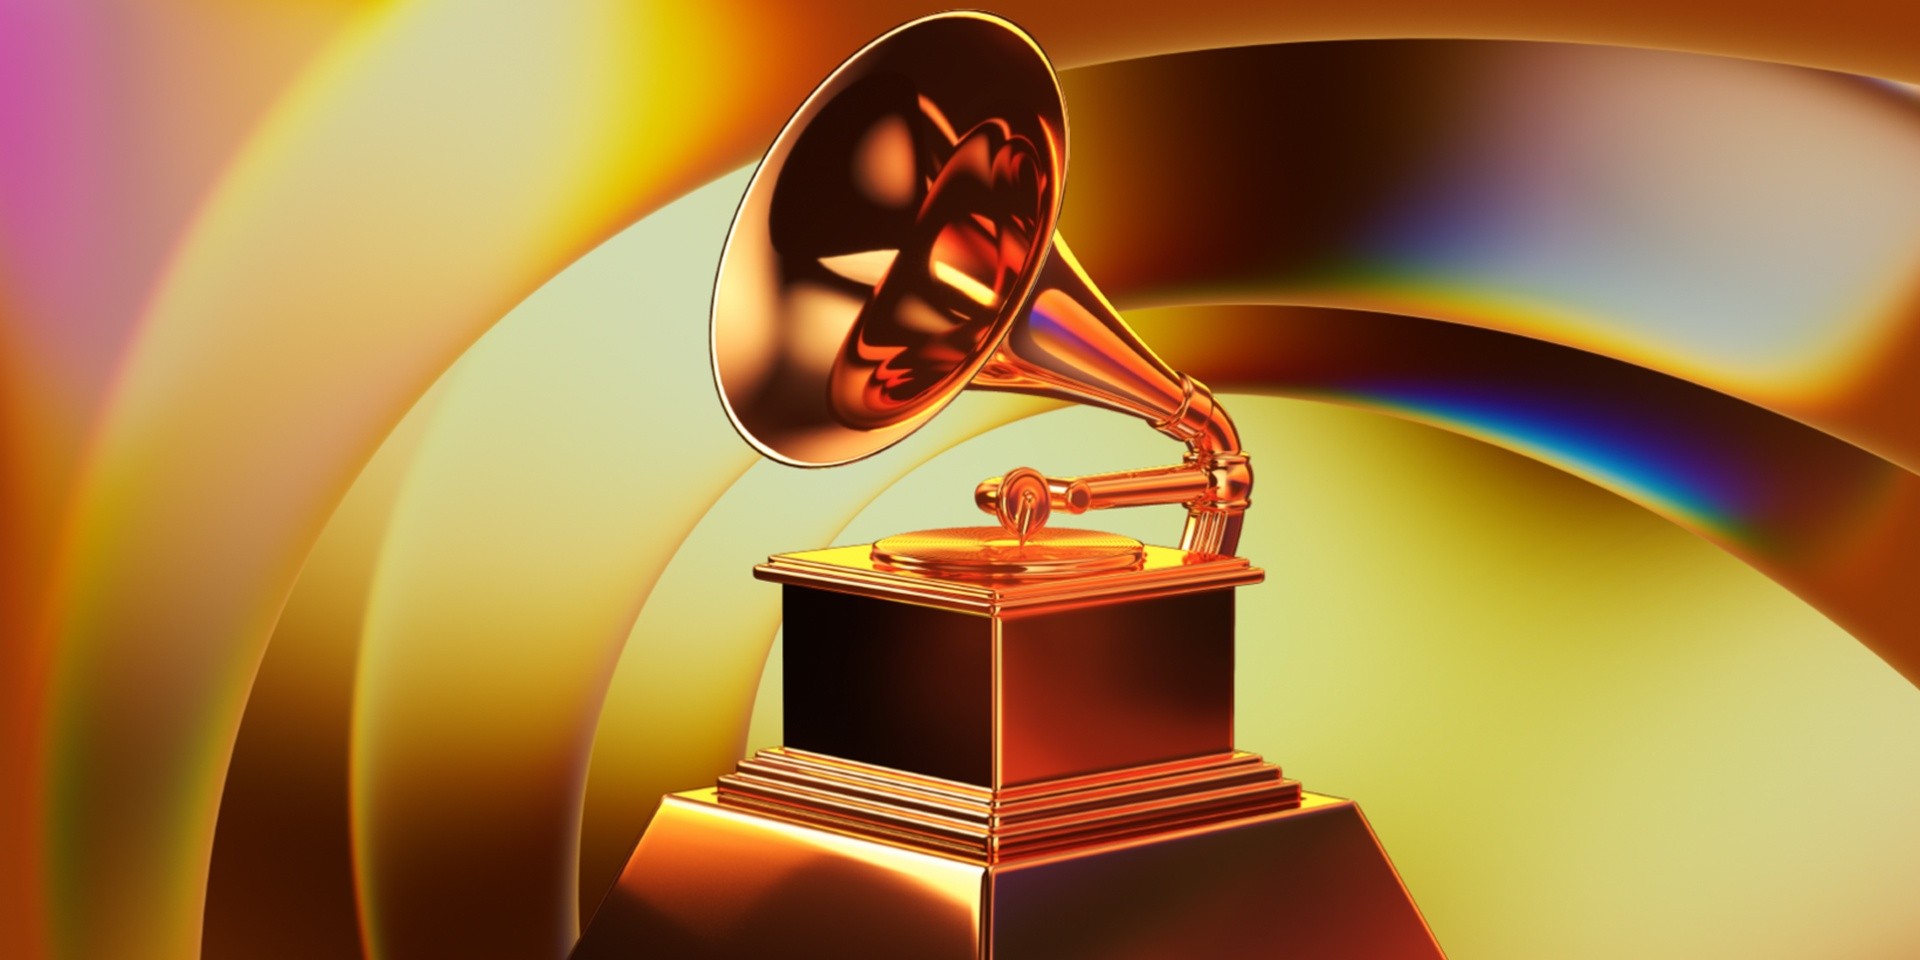 The 64th GRAMMY Awards announces new date and venue